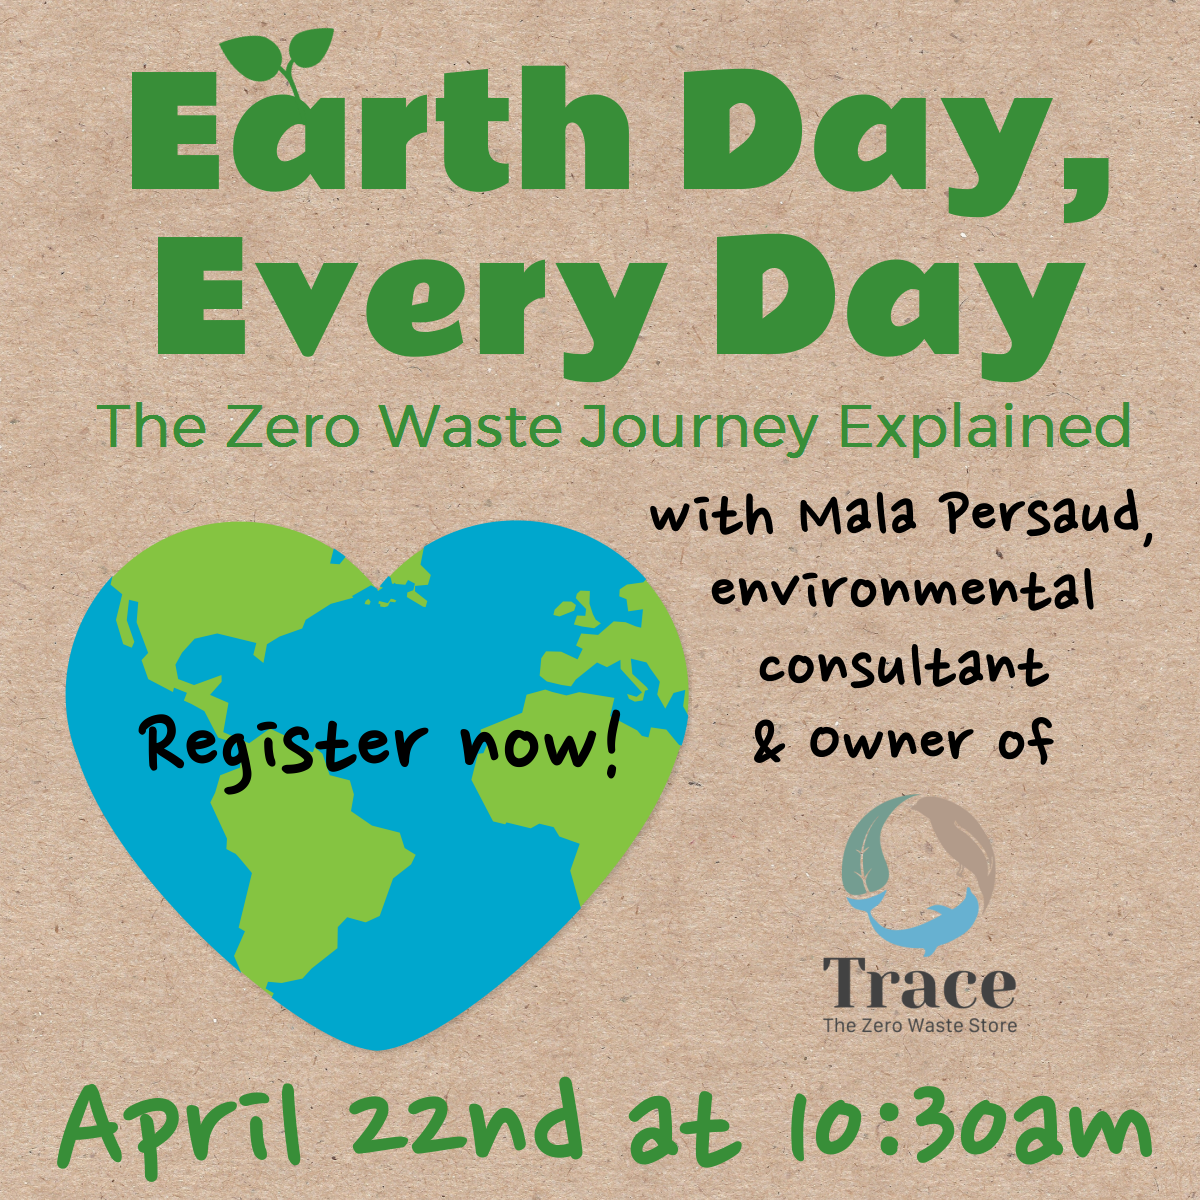 Earth Day, Every Day Program